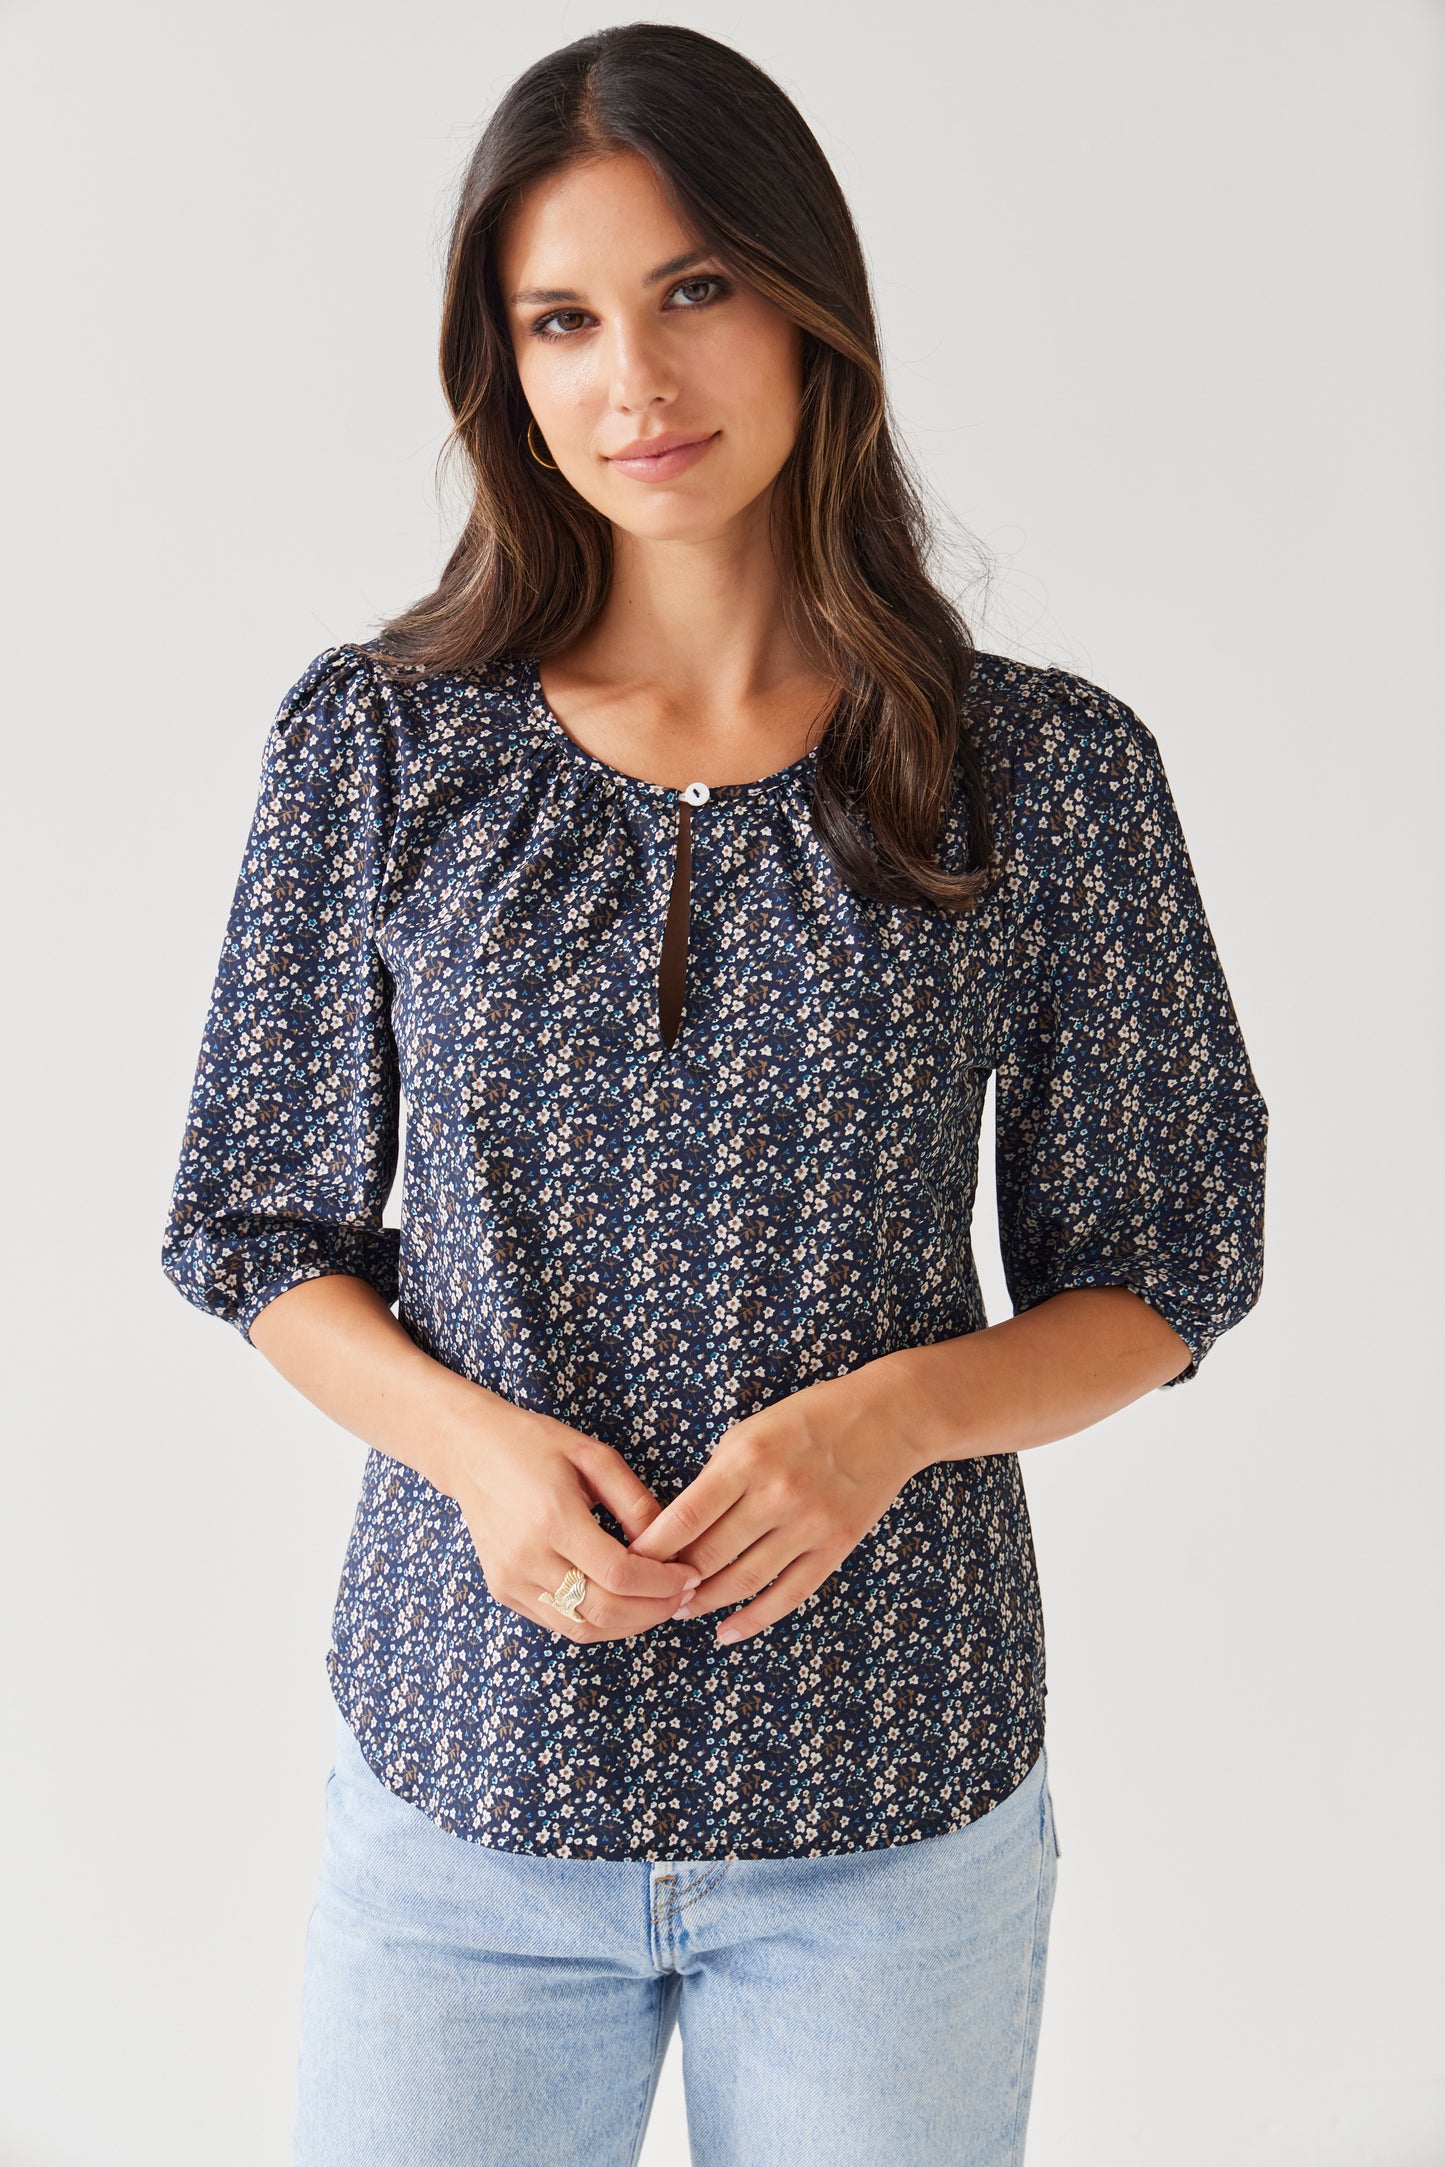 Tuesday Therese Top | Navy Ditsy